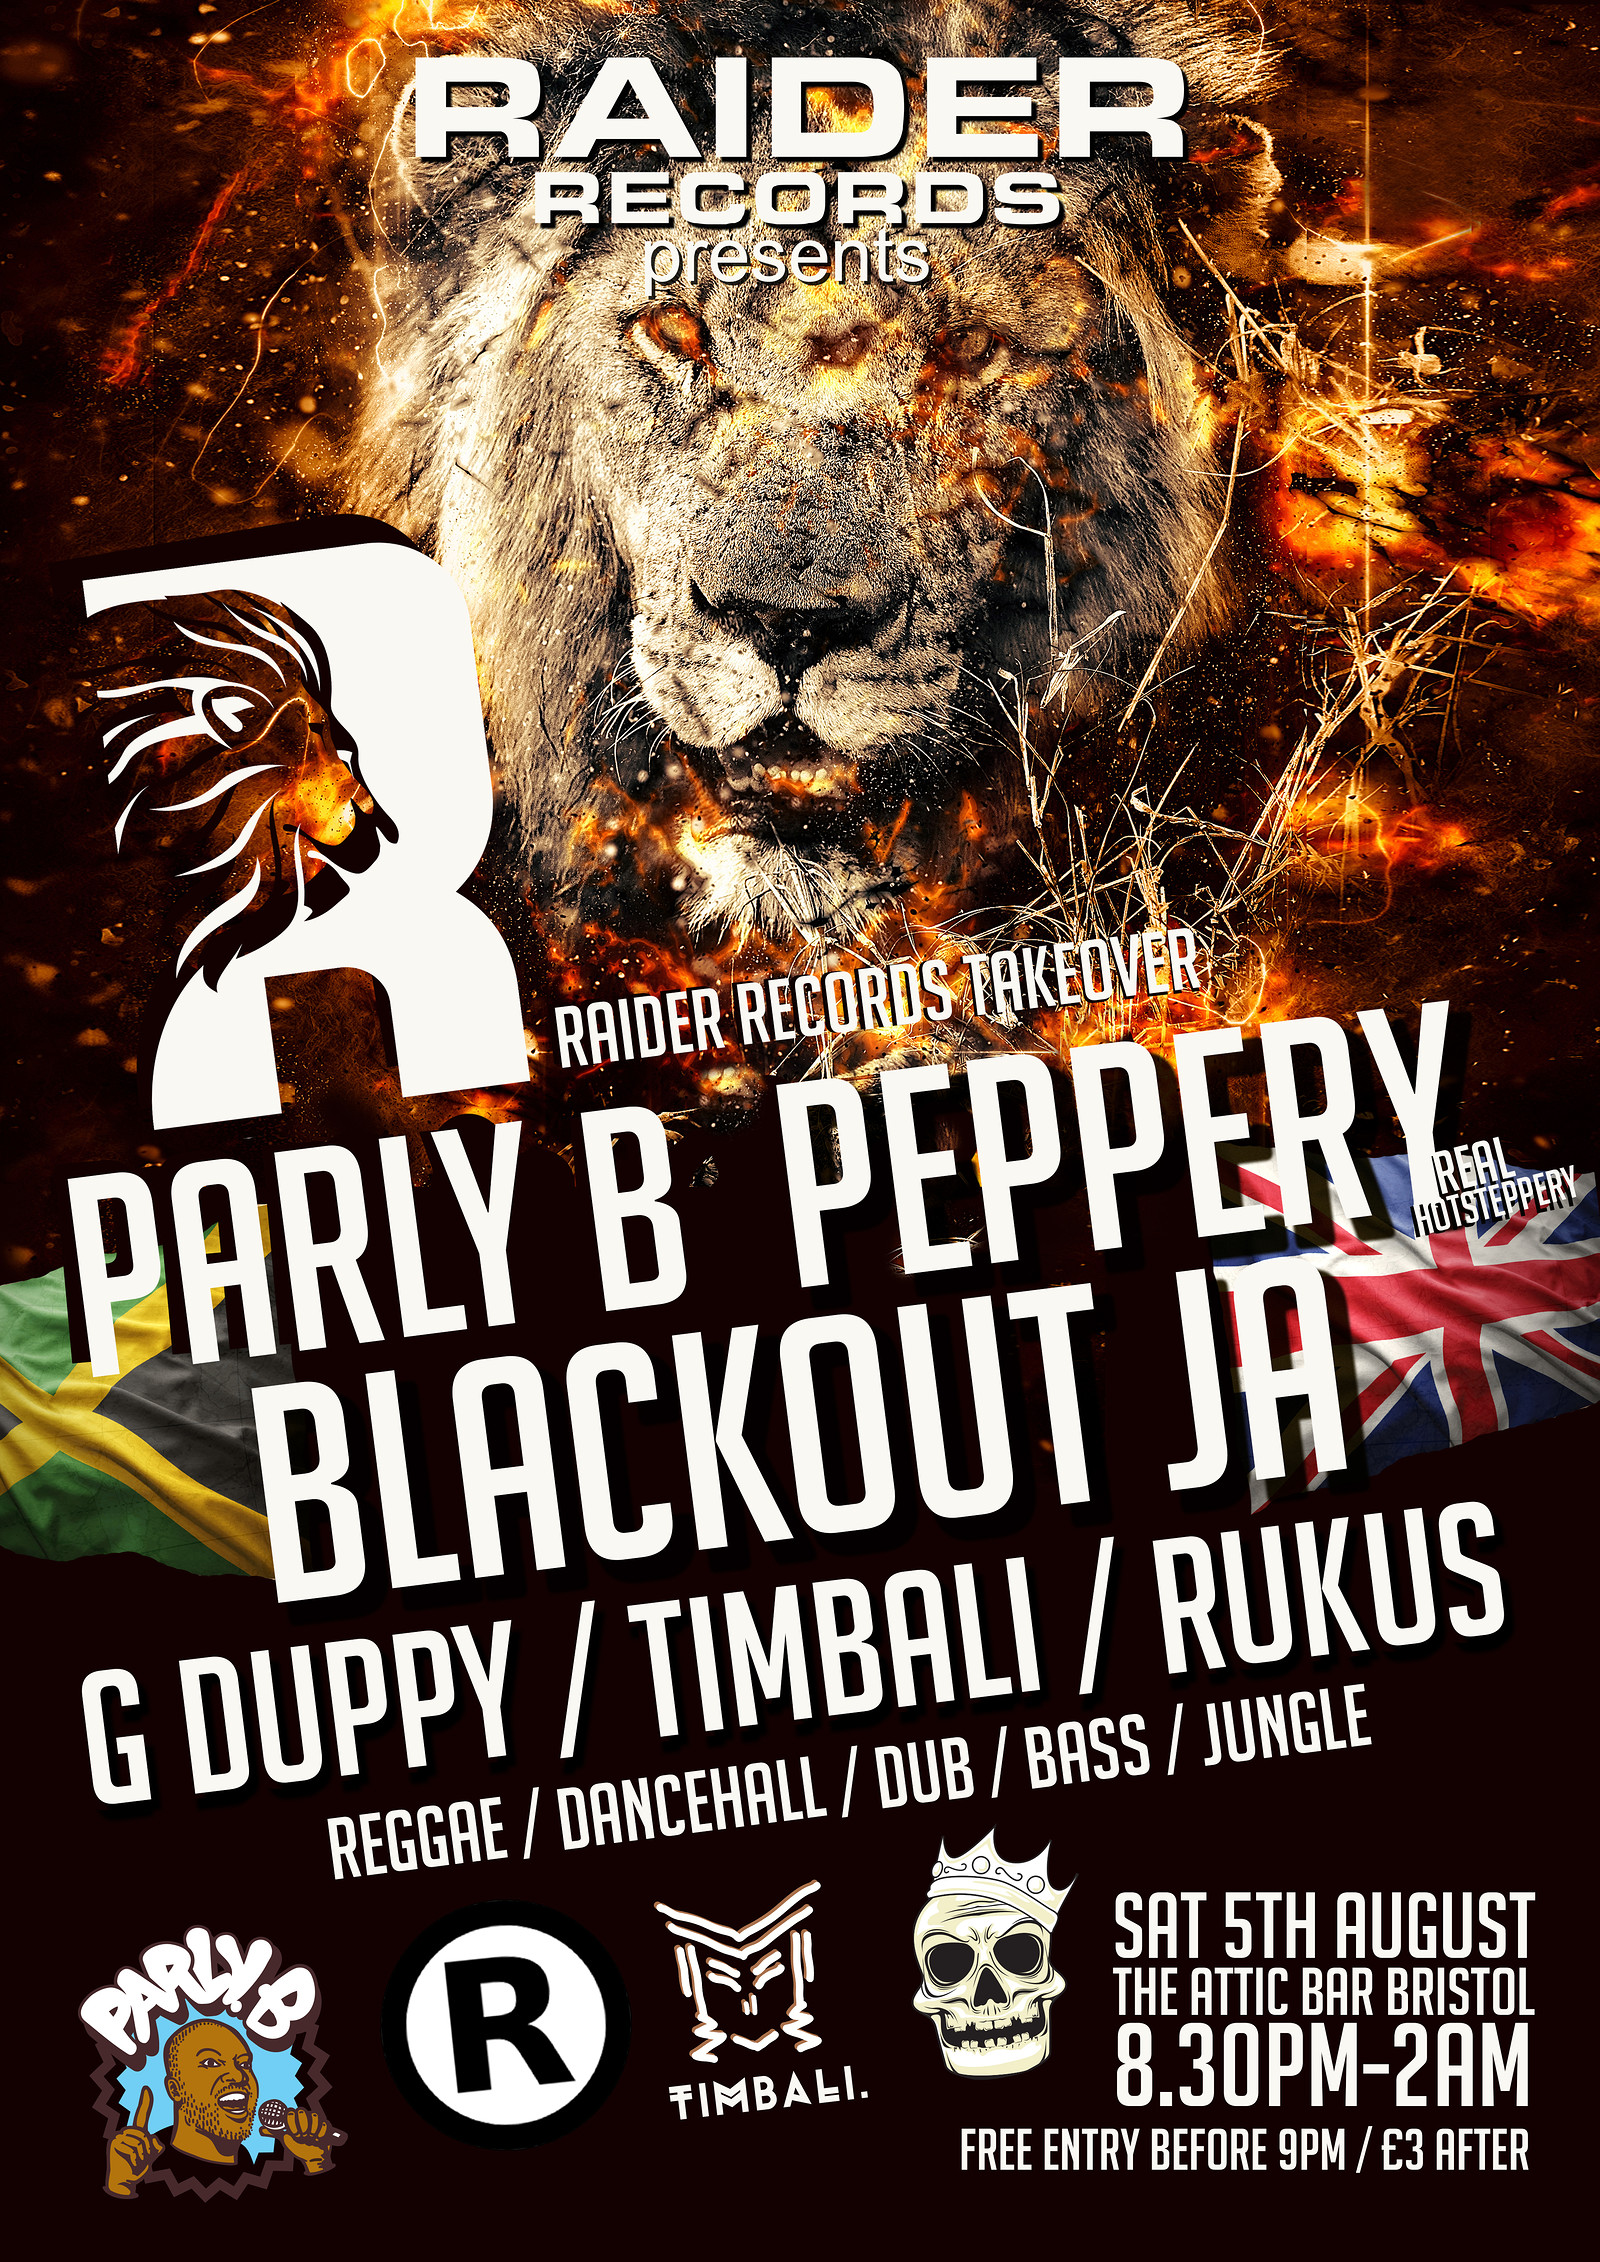 Raider Records Ft. Peppery, Parly B & Blackout JA at The Attic Bar